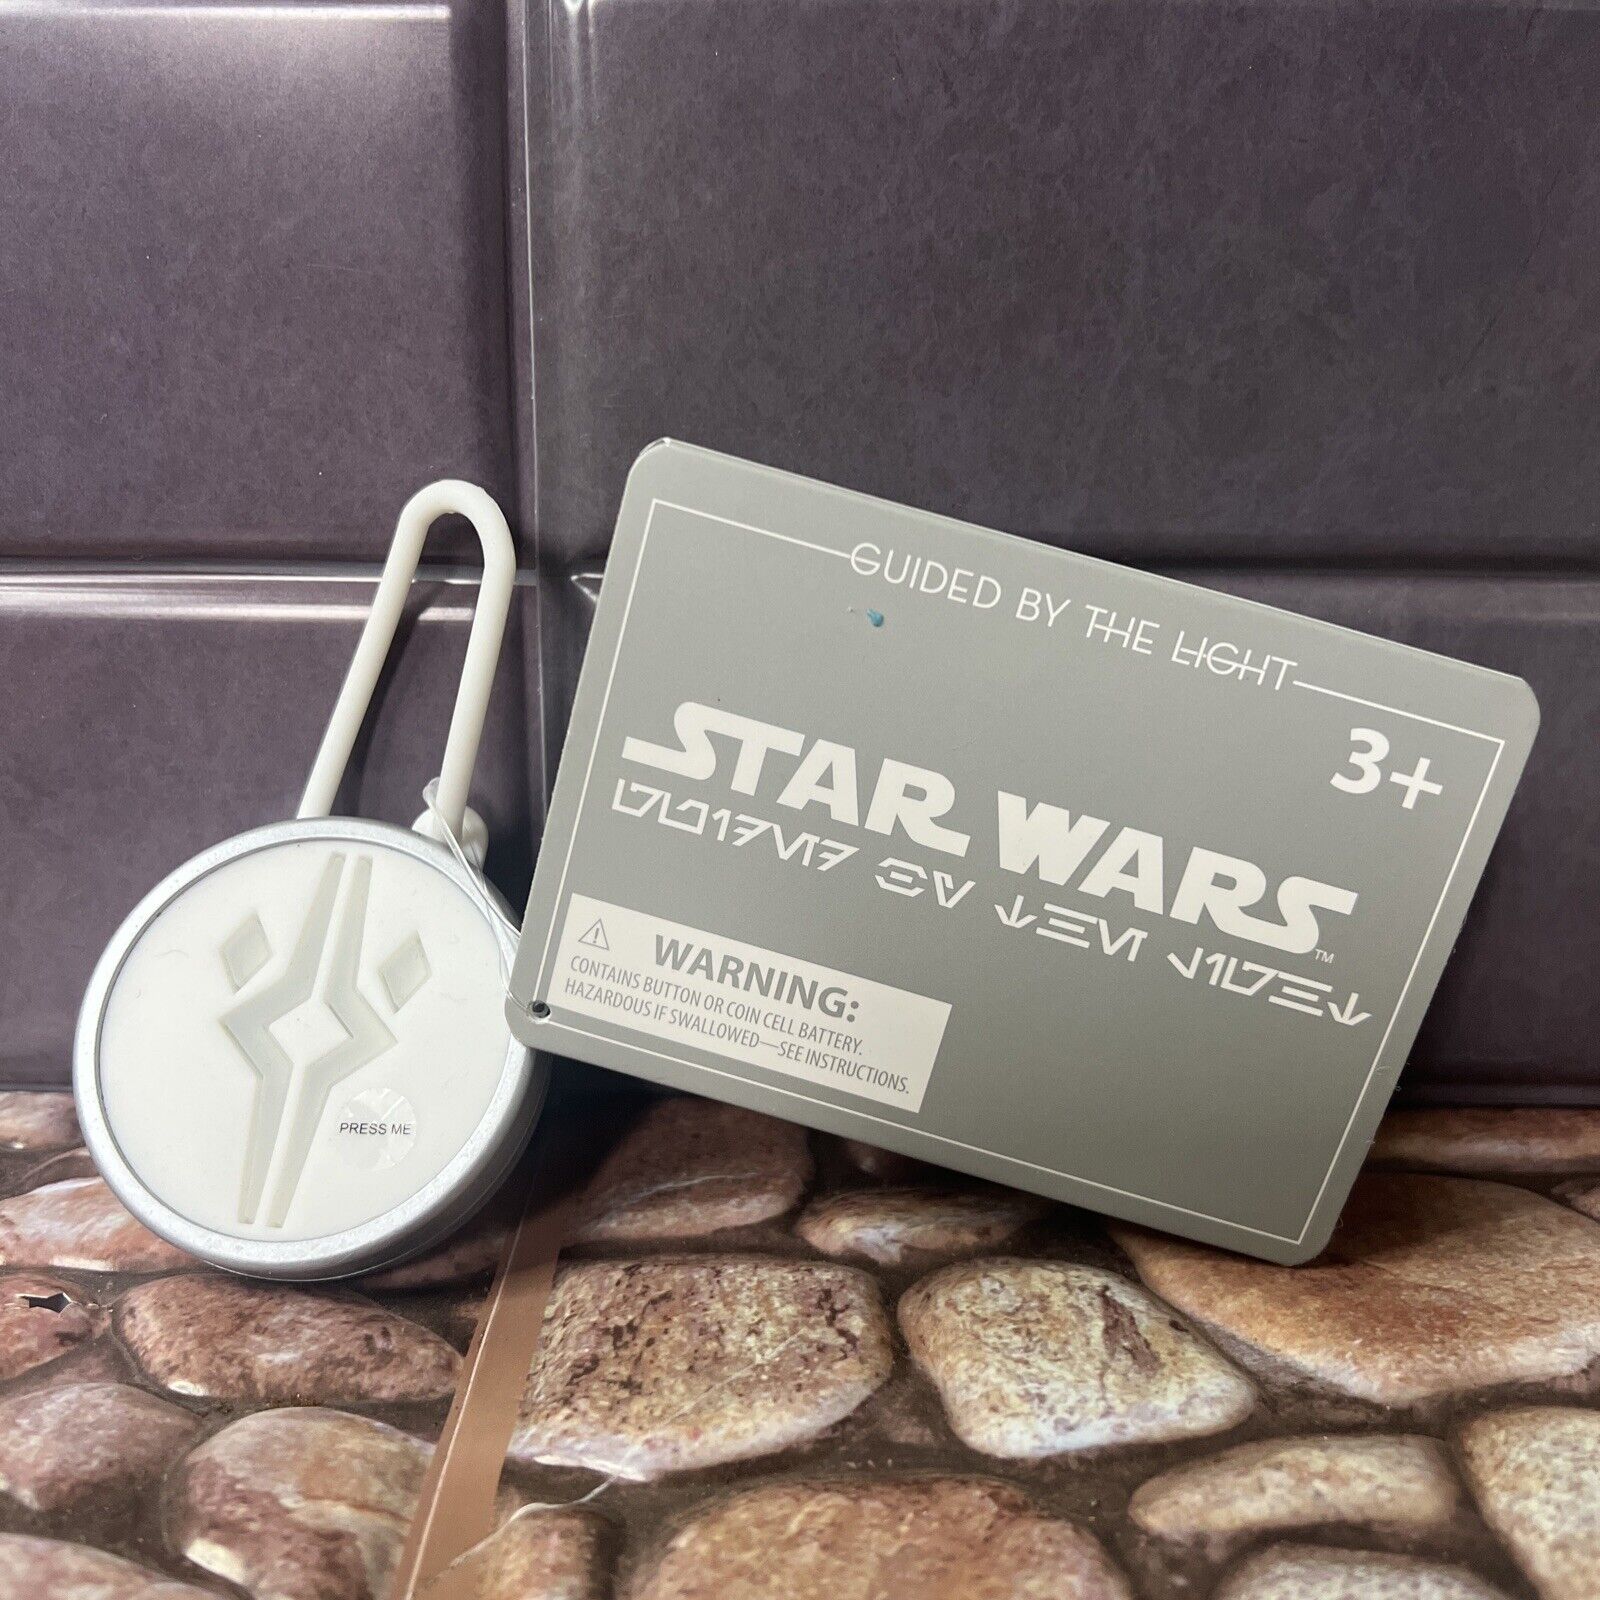 2022 Disney Star Wars Guided by the Light Ashley Eckstein Exclusive KeyChain (C2